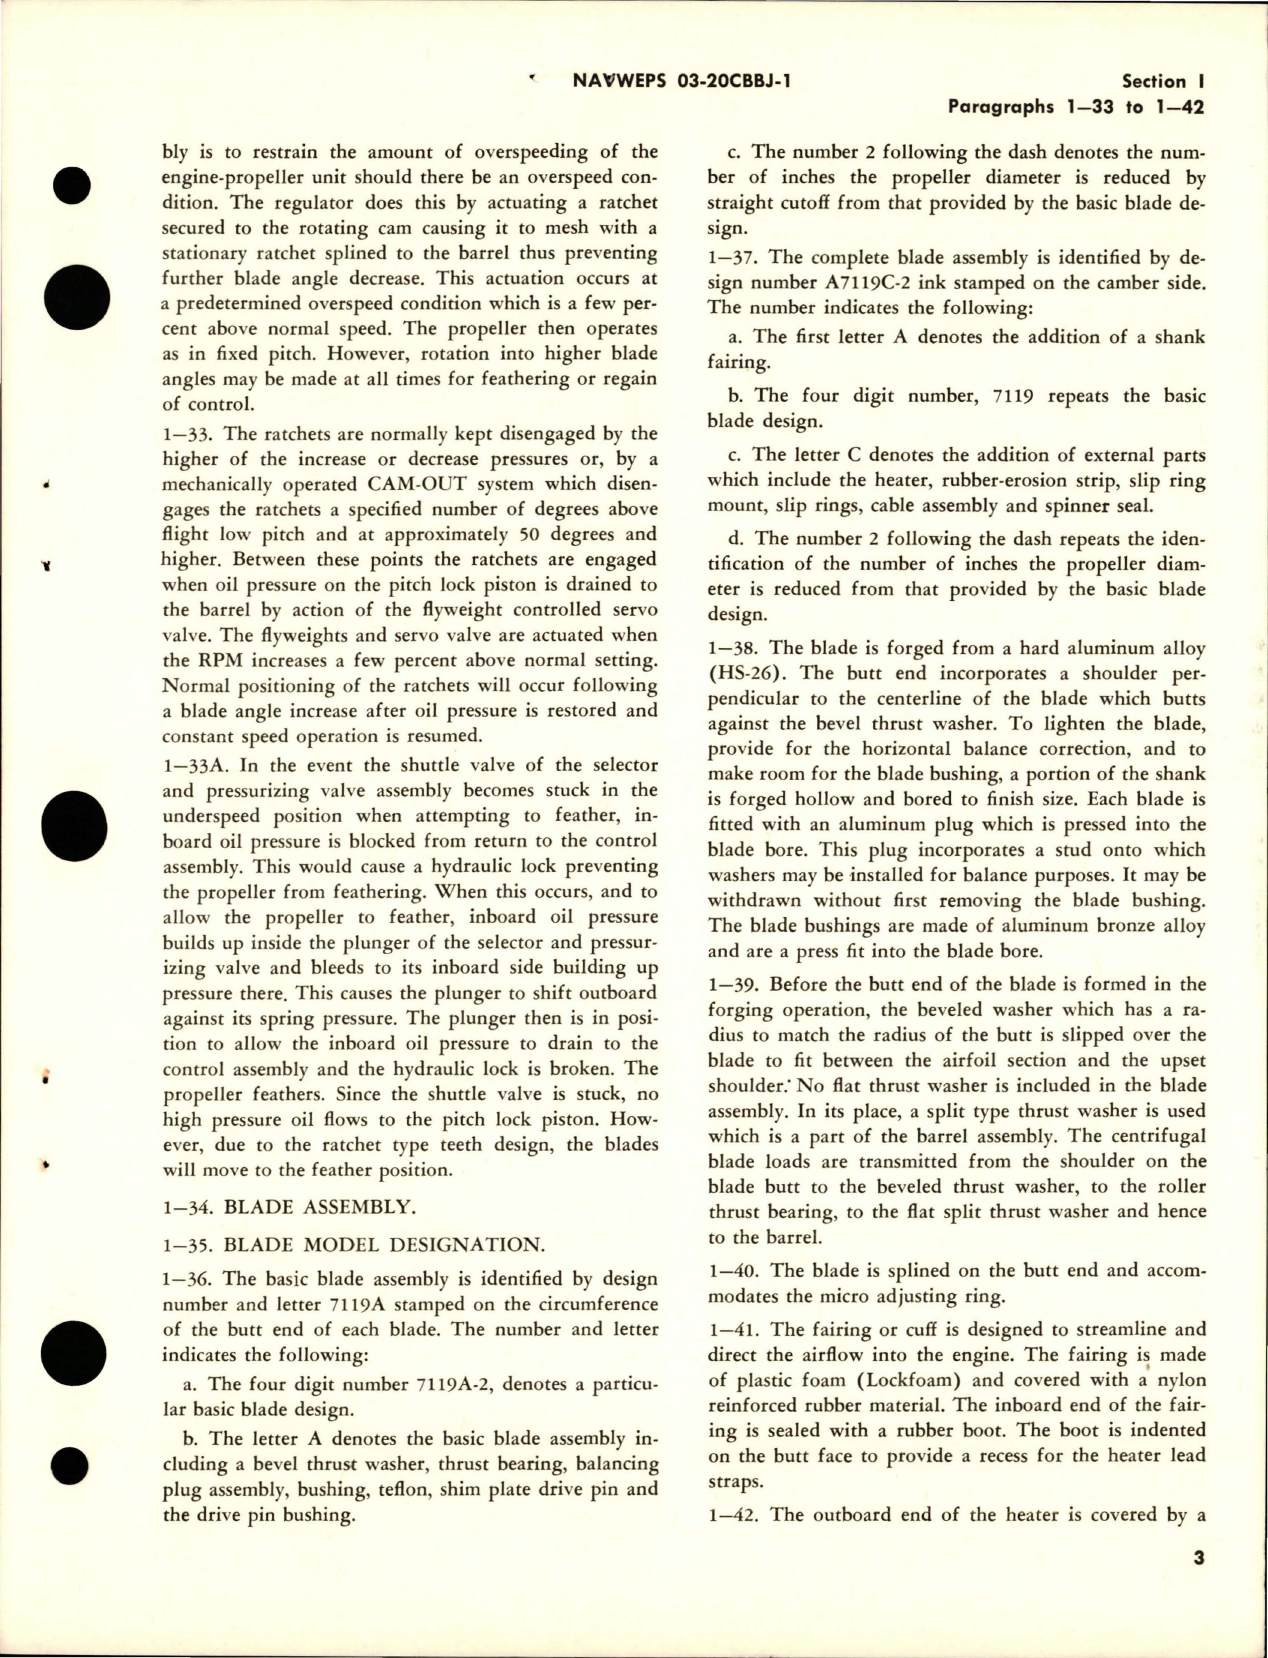 Sample page 7 from AirCorps Library document: Operation and Maintenance Instructions for Variable Pitch Propeller - Models 54H60-69, 54H60-73, and 54H60-75